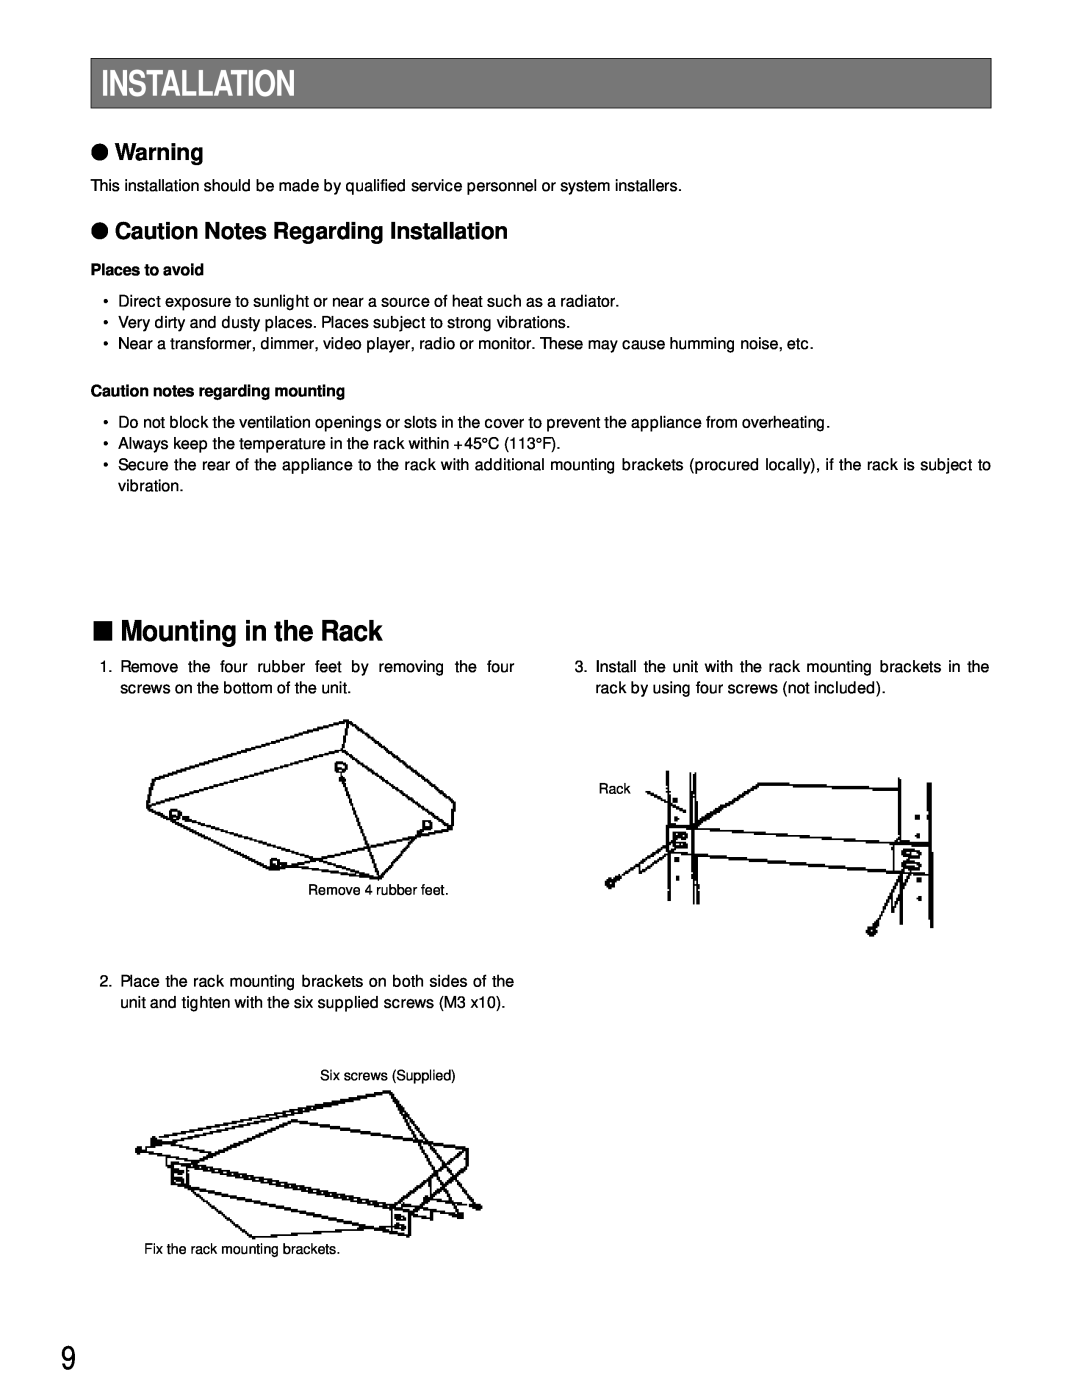 Panasonic WJ-HD100 operating instructions Mounting in the Rack, Caution Notes Regarding Installation, Places to avoid 